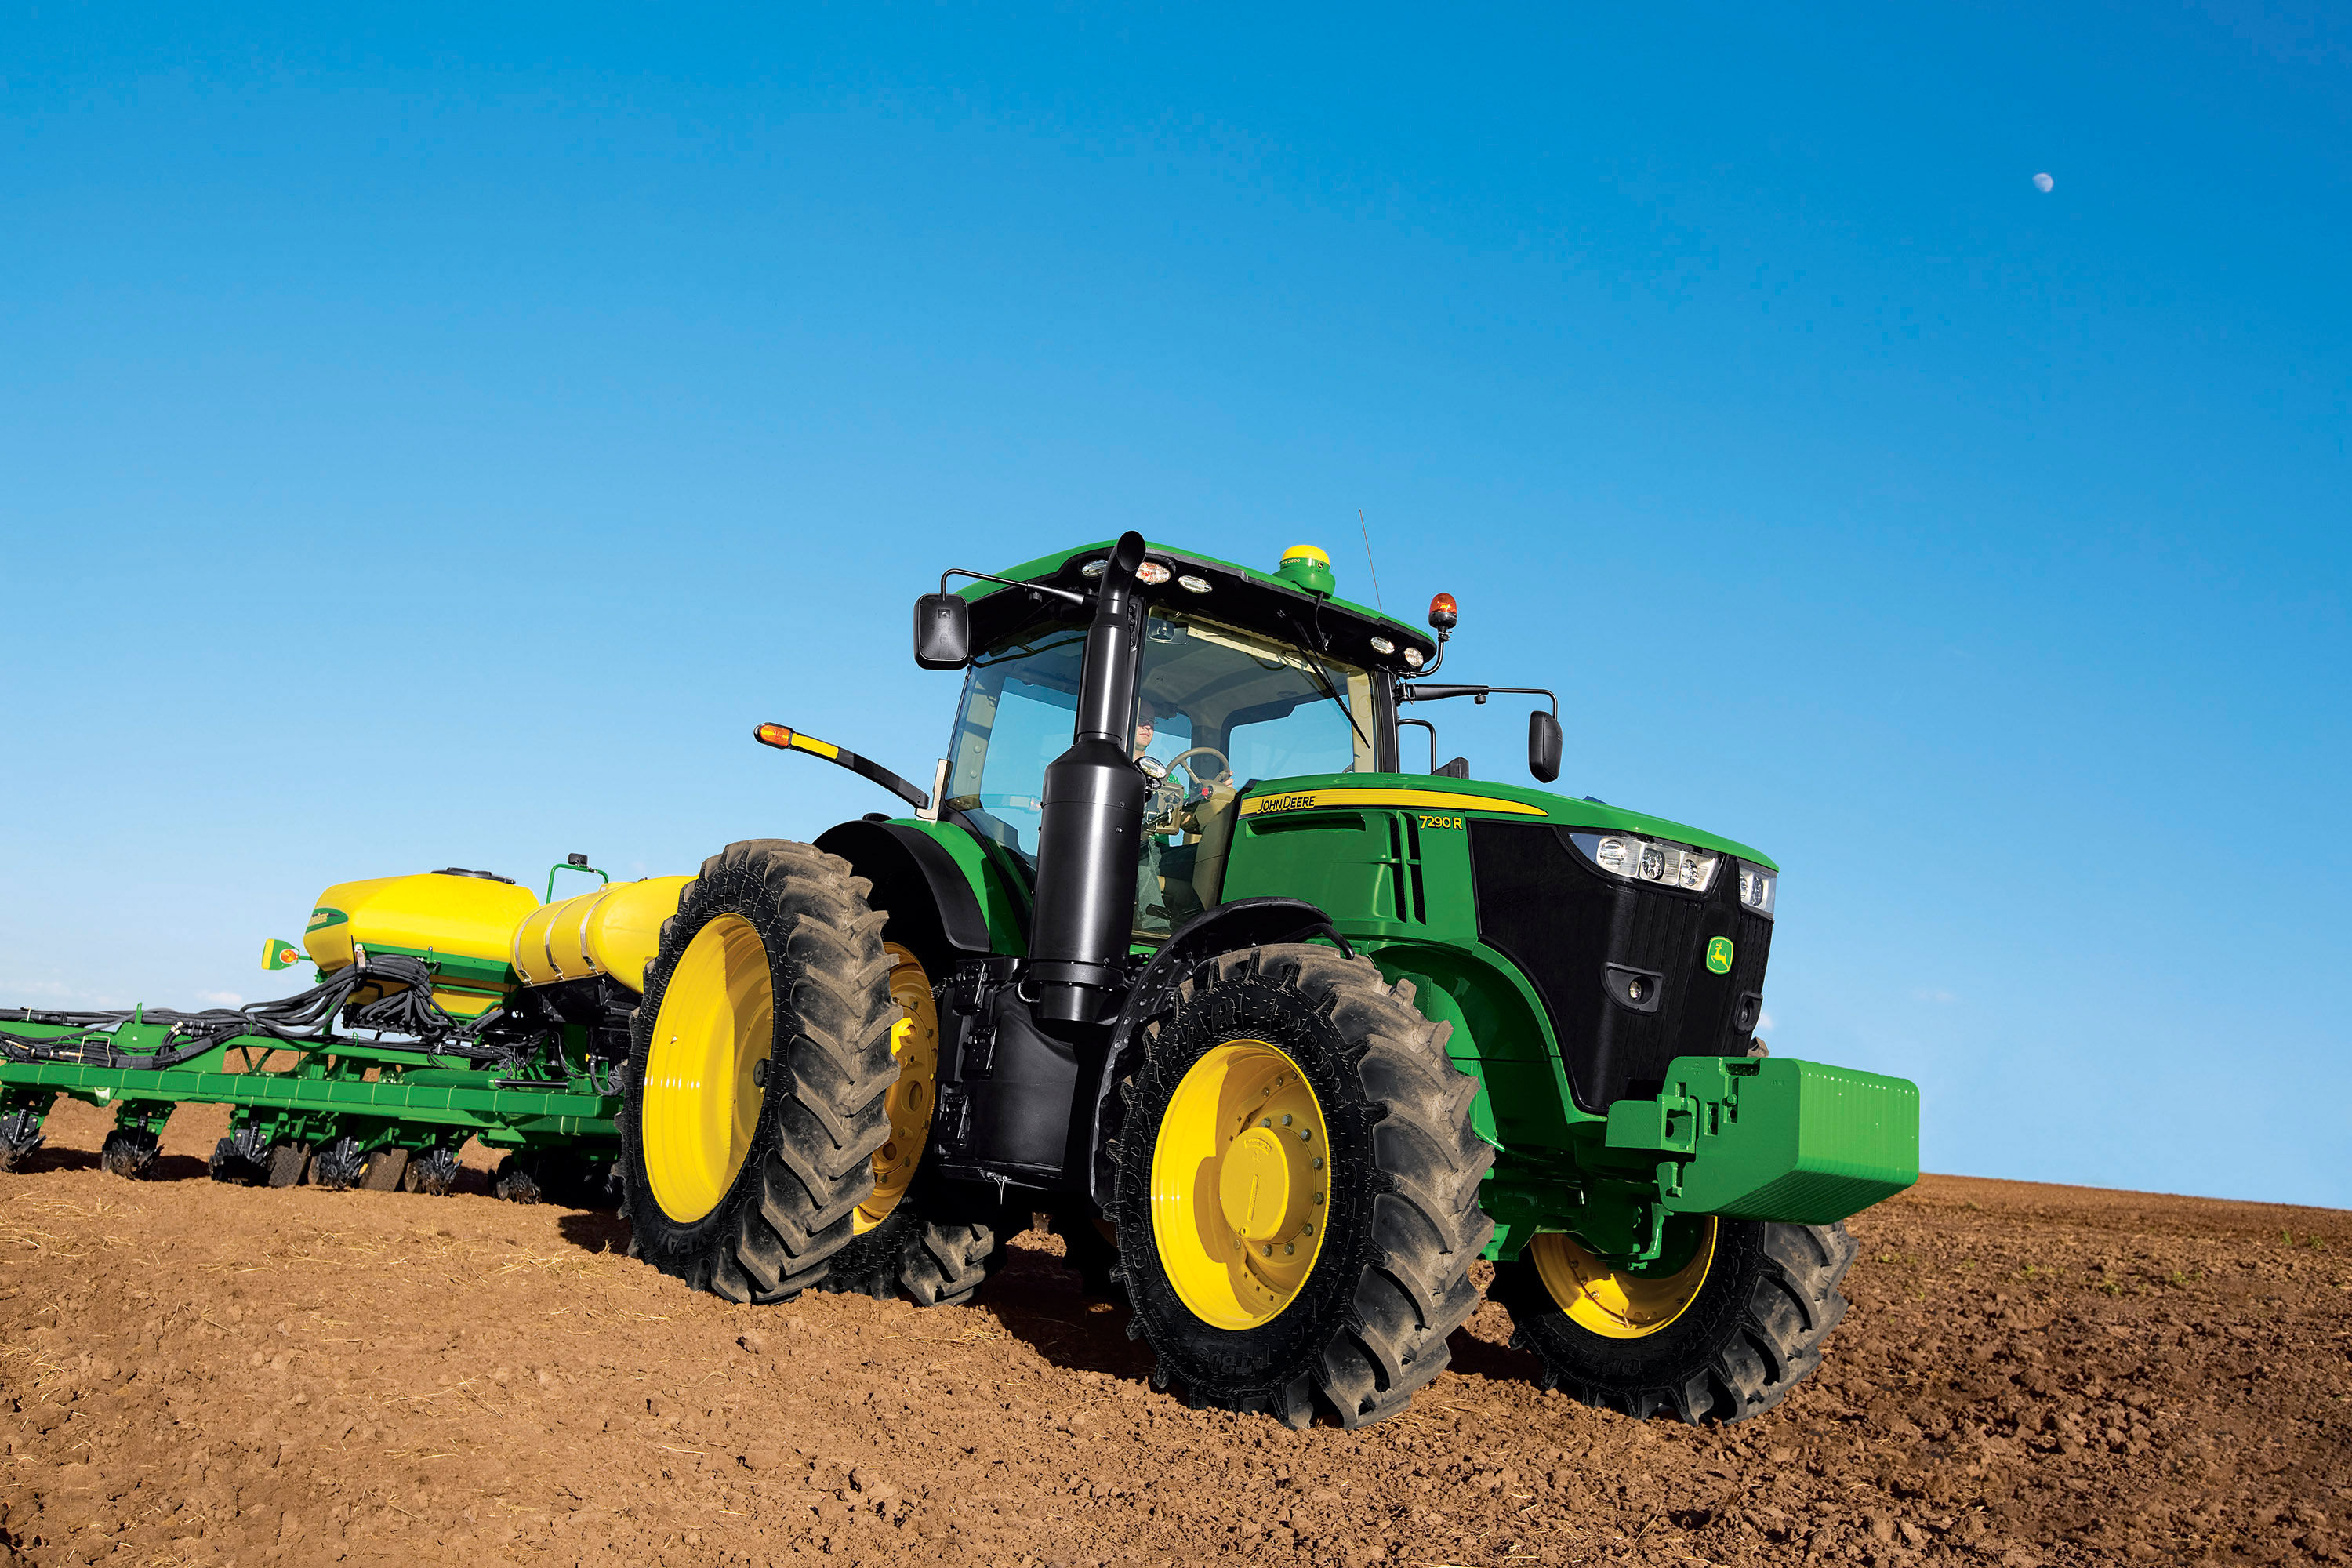 New John Deere 7R Tractors Boost Power, Performance and ...